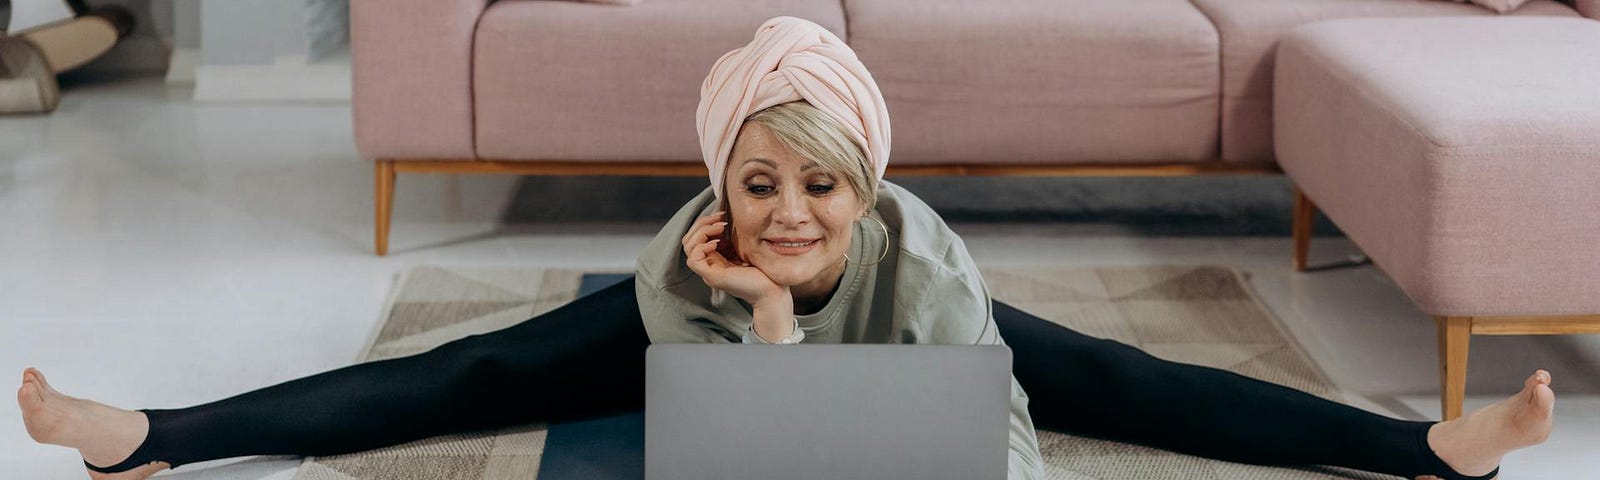 Smiling older woman on a yoga mat with legs stretched out andlooking at a computer screen.